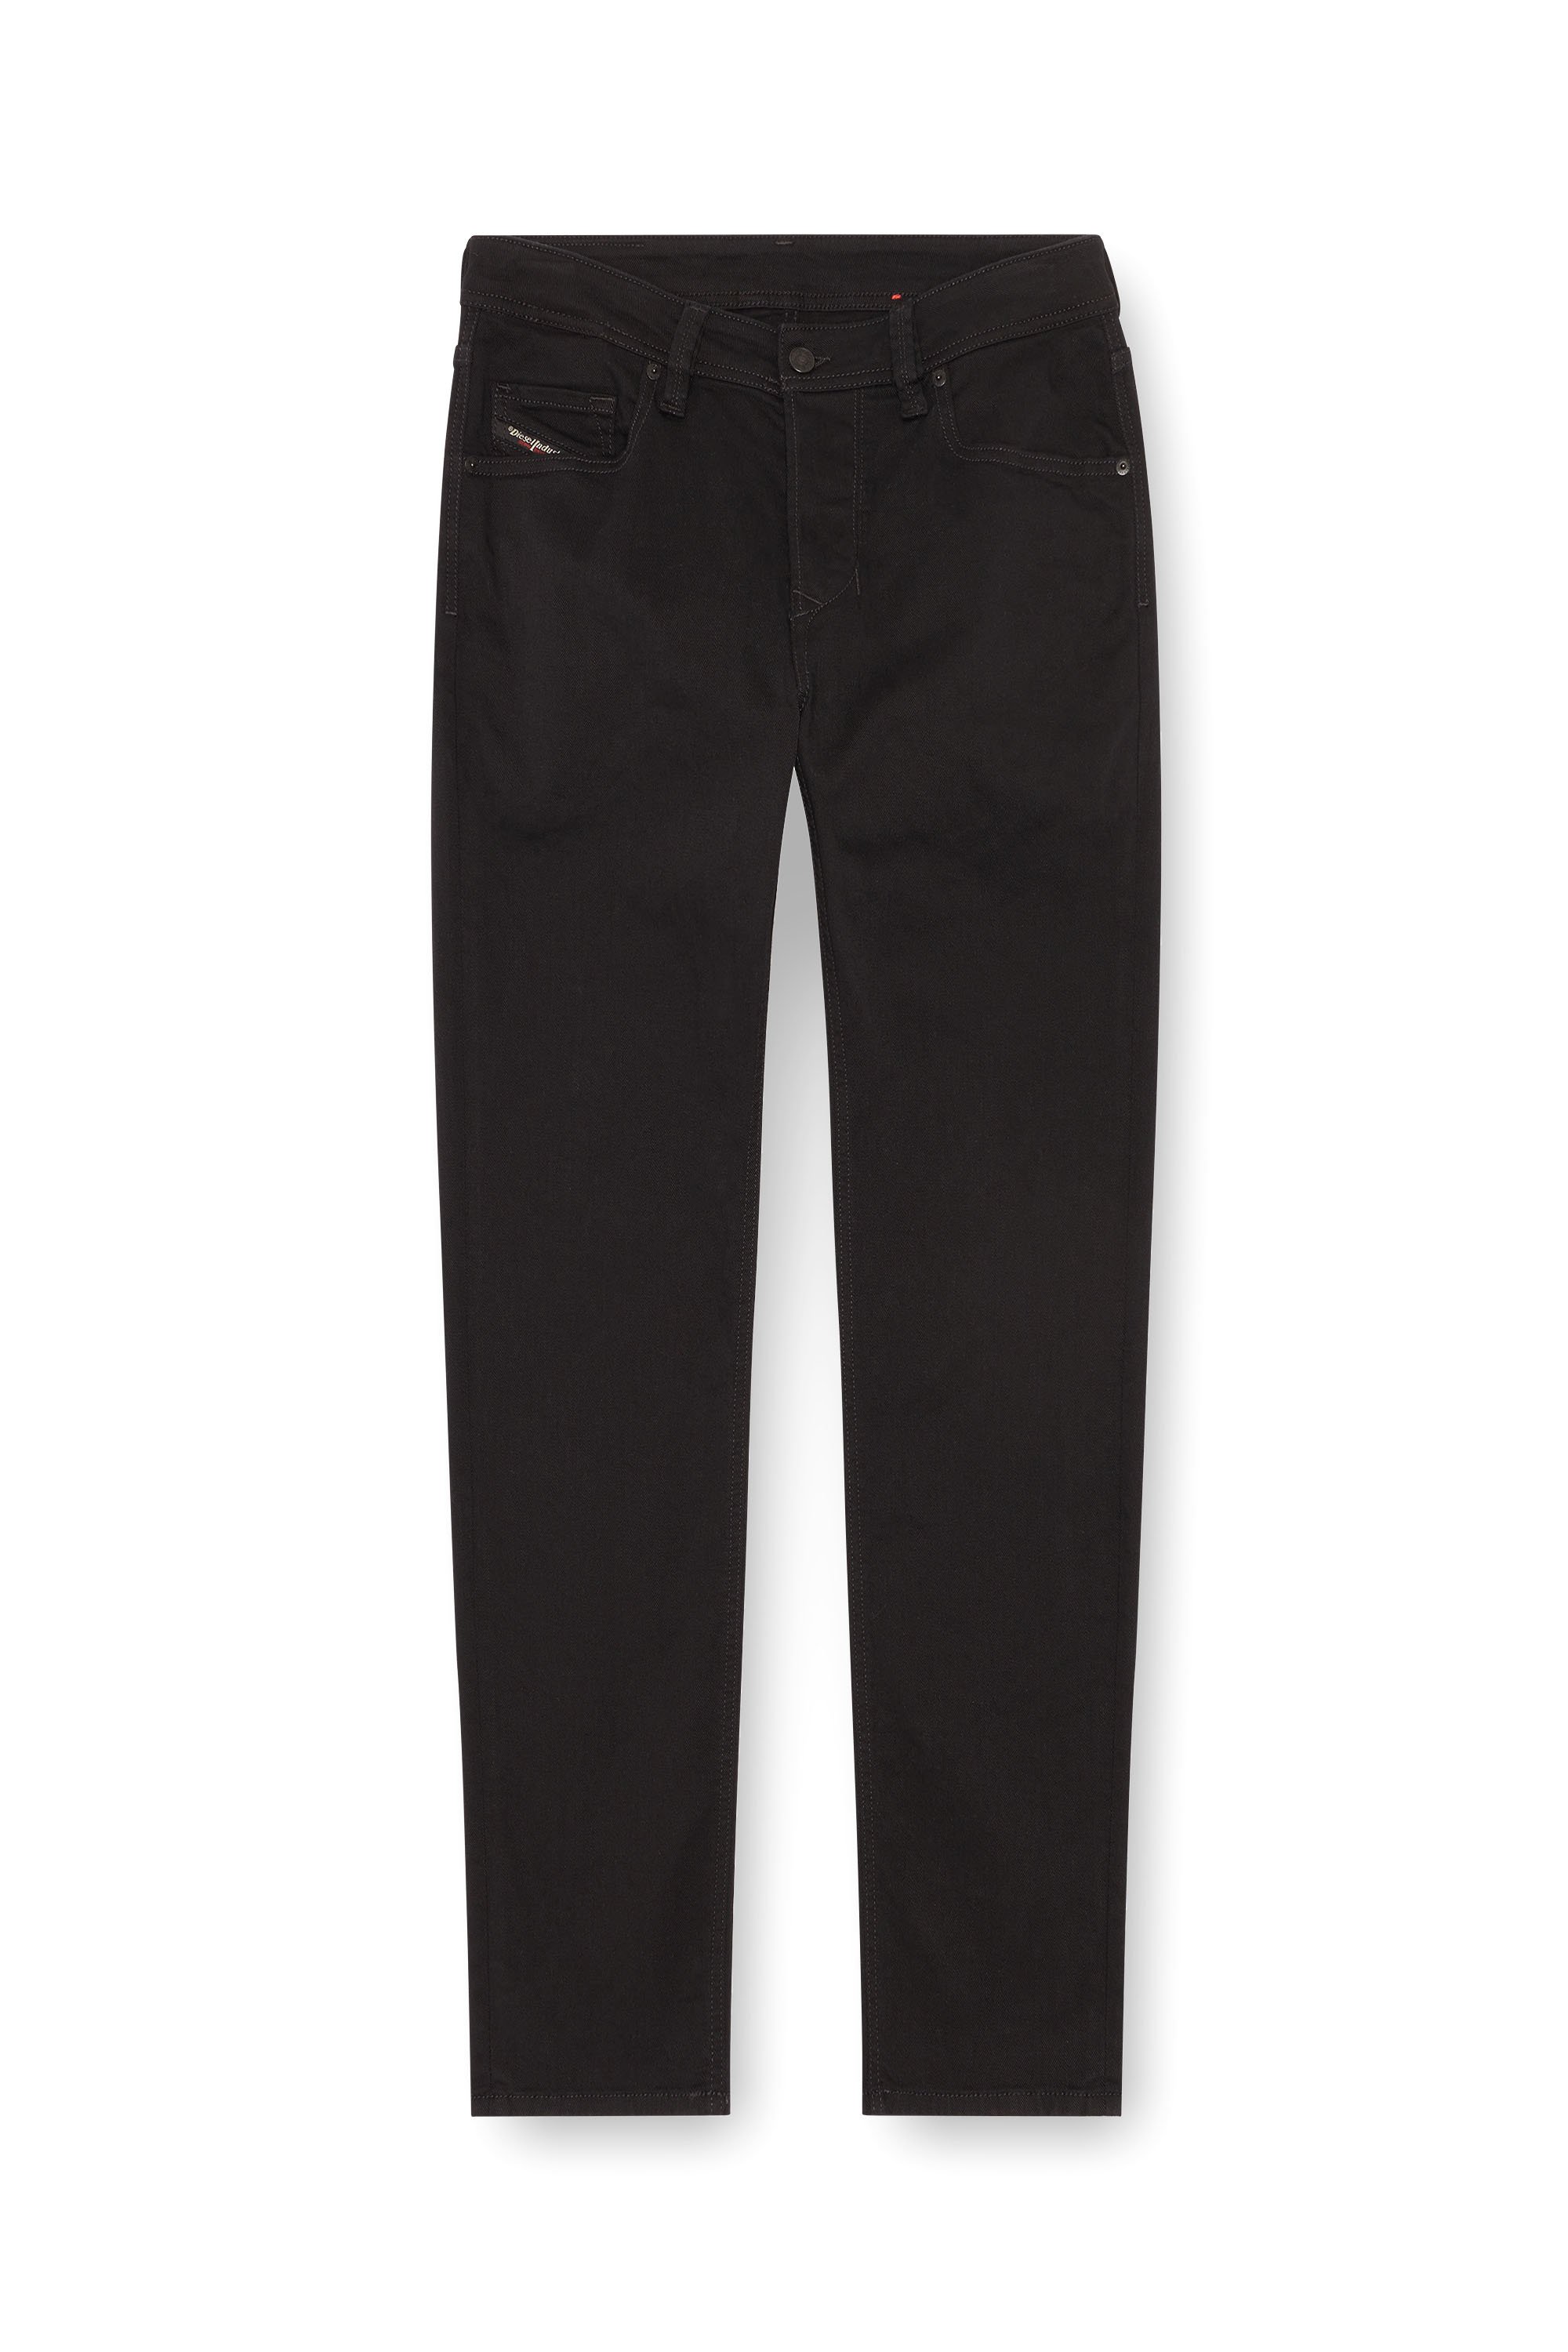 Diesel - Tapered Jeans 1986 Larkee-Beex 0688H, Hombre Tapered Jeans - 1986 Larkee-Beex in Negro - Image 6